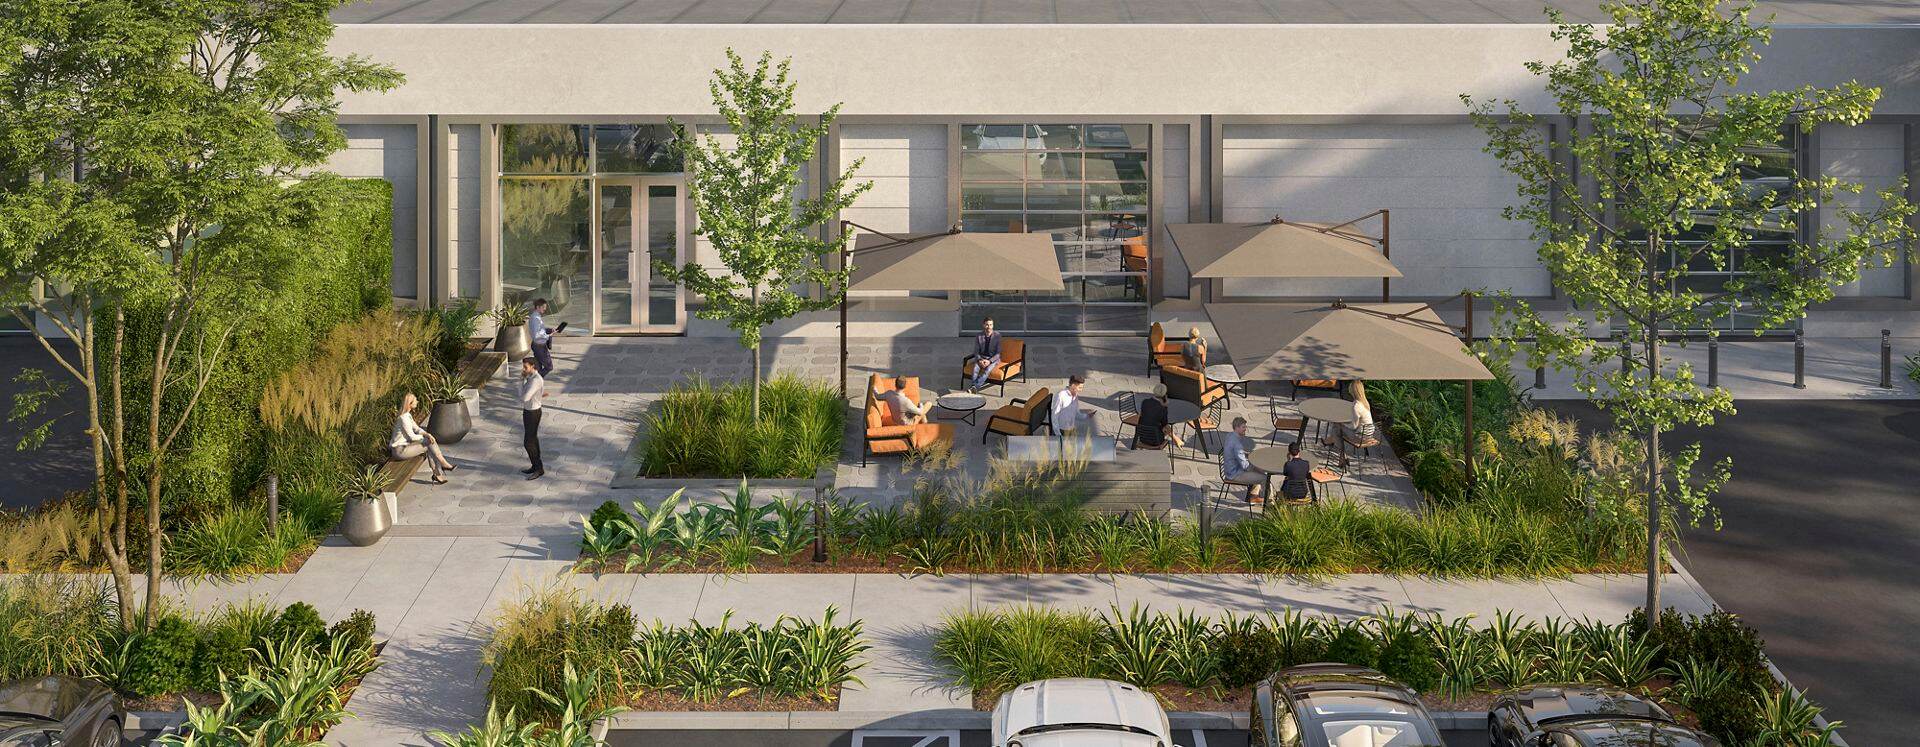 Exterior rendering of 305 North Mathilda in Sunnyvale, Silicon Valley, Ca